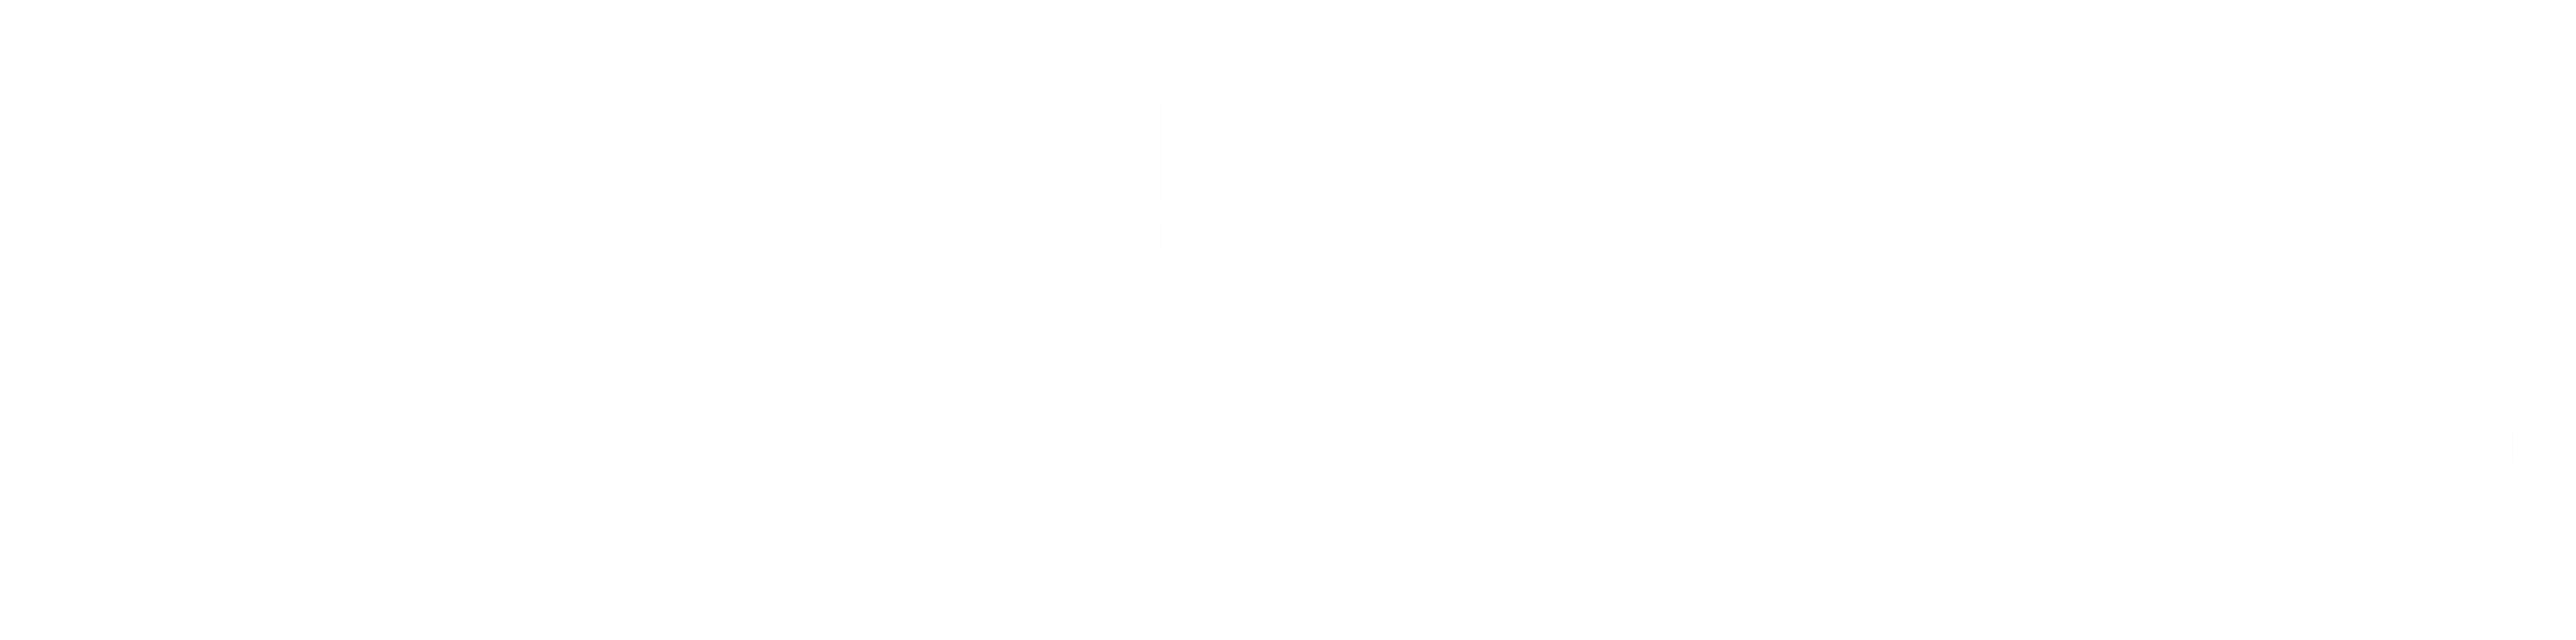 Aristocrat Cleaning logo with a tagline 